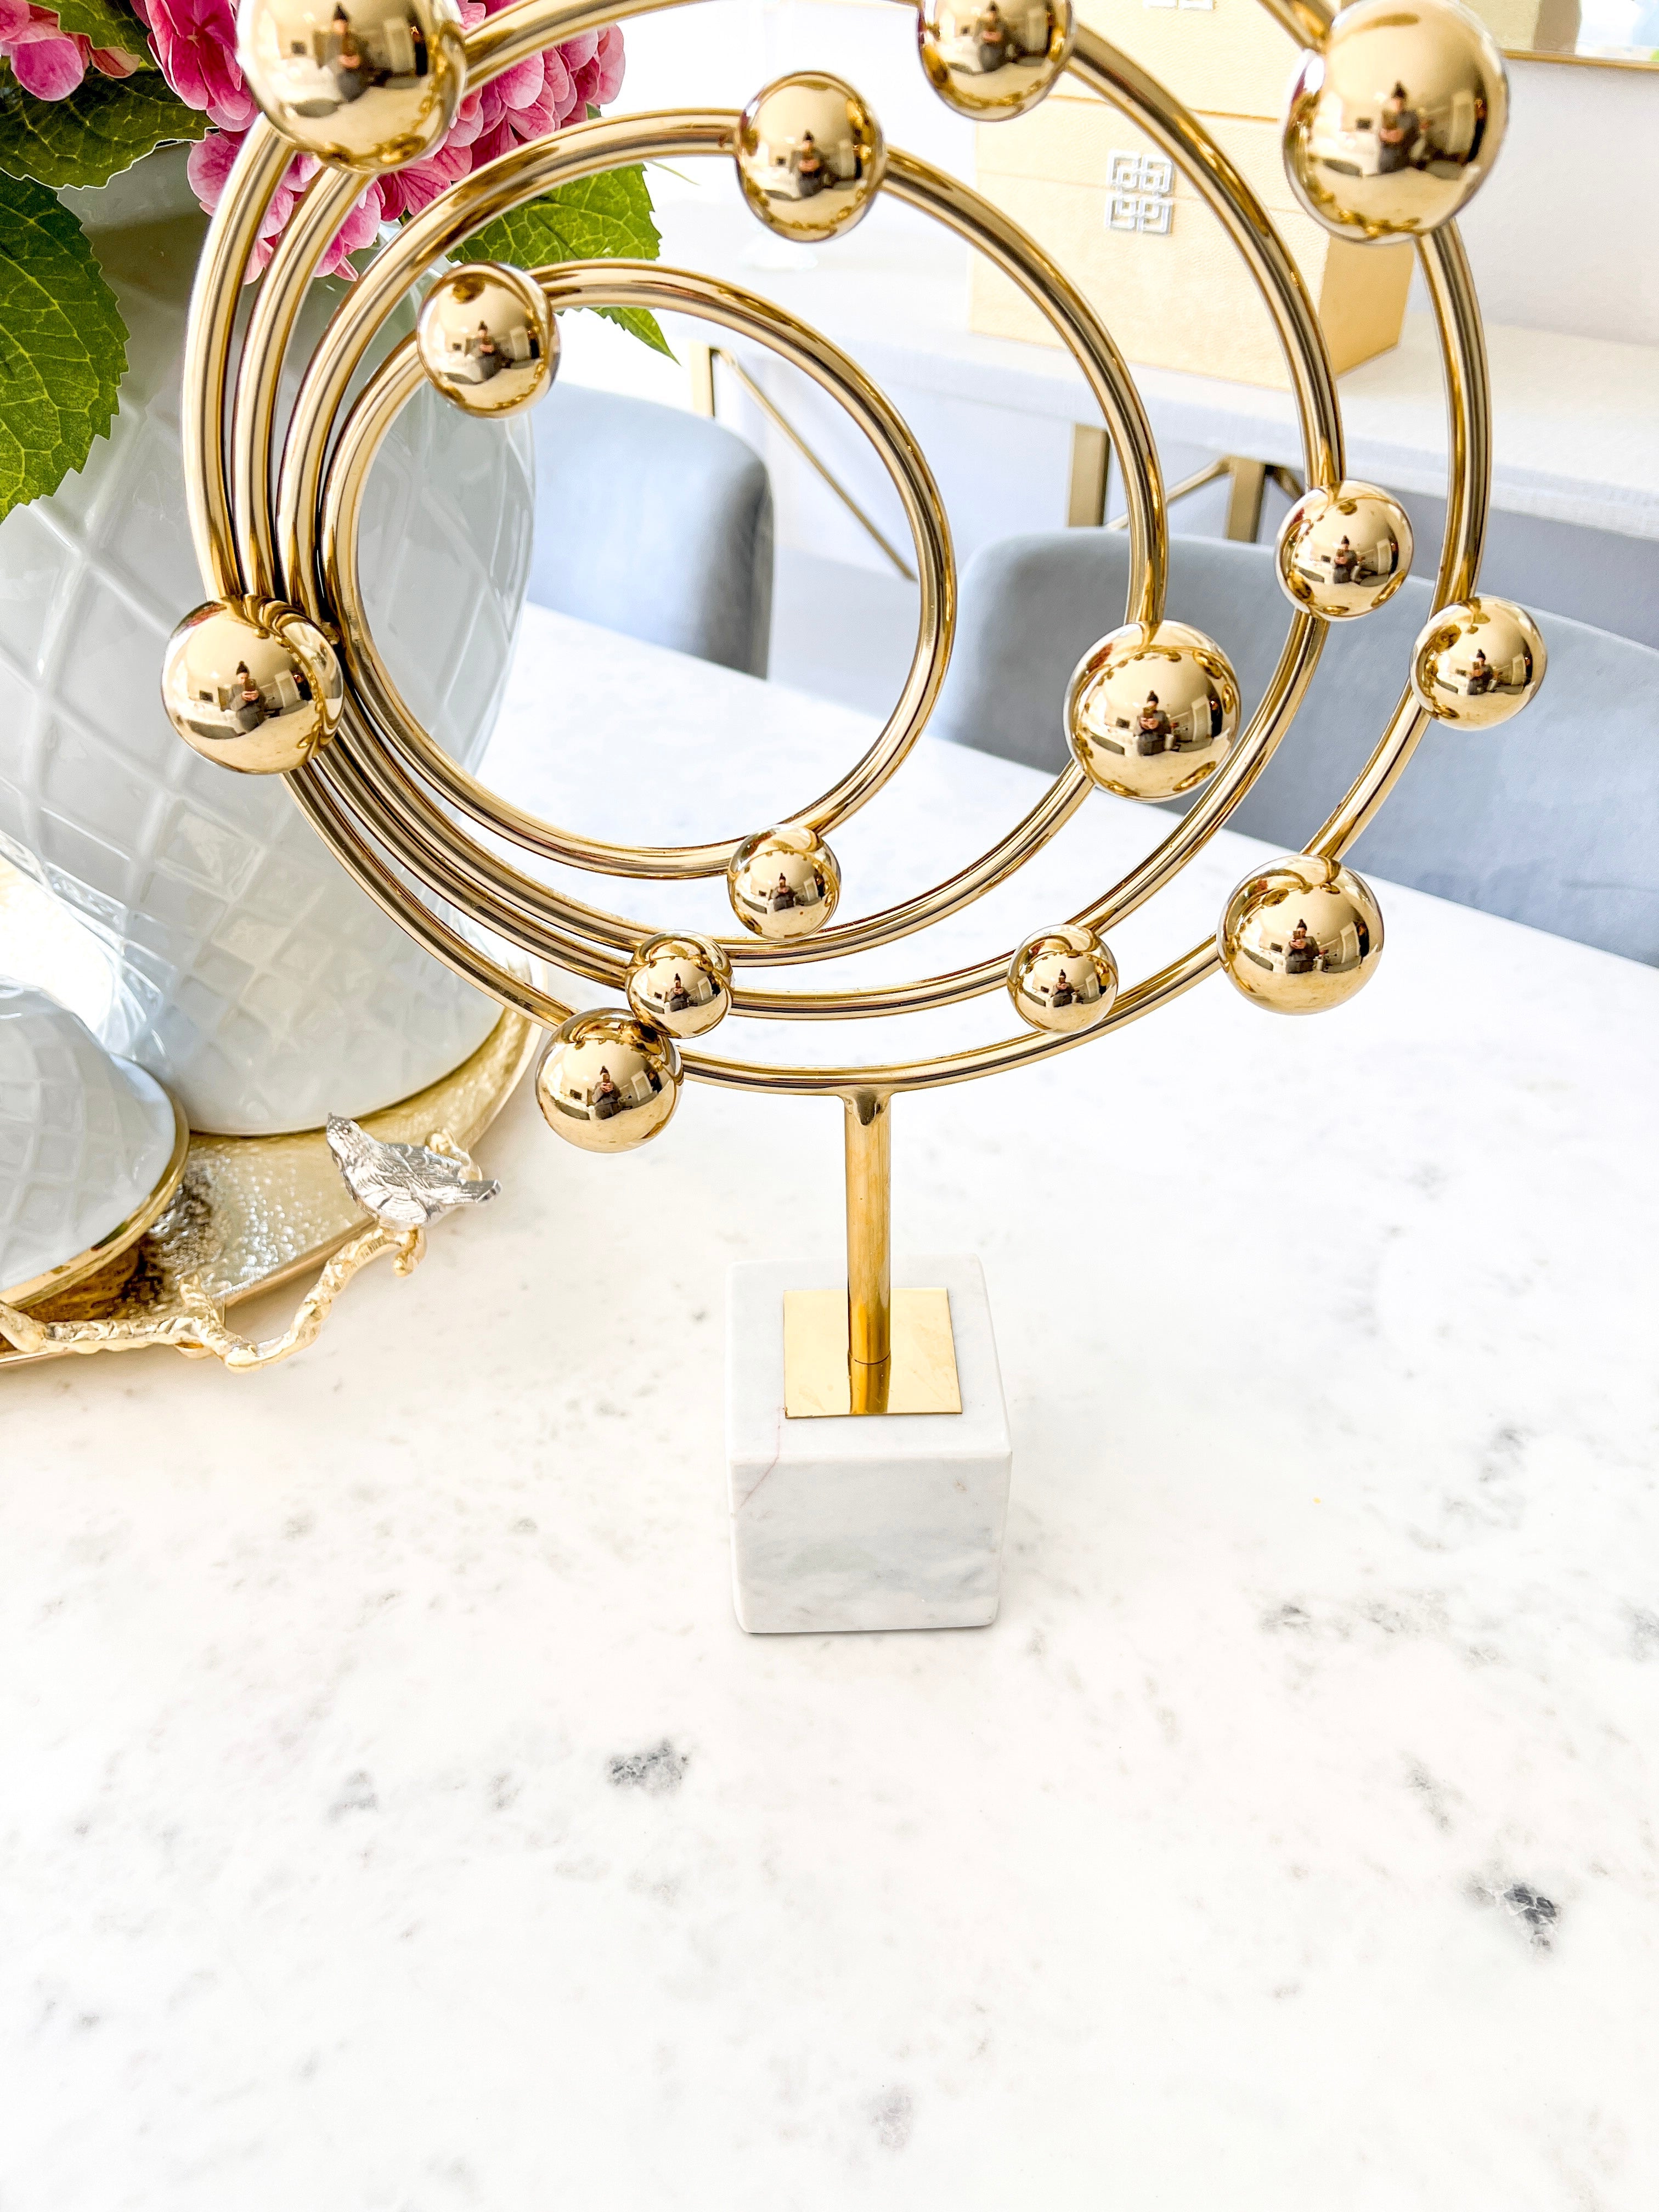 Gold Galaxy Sculpture with Marble Base - HTS HOME DECOR